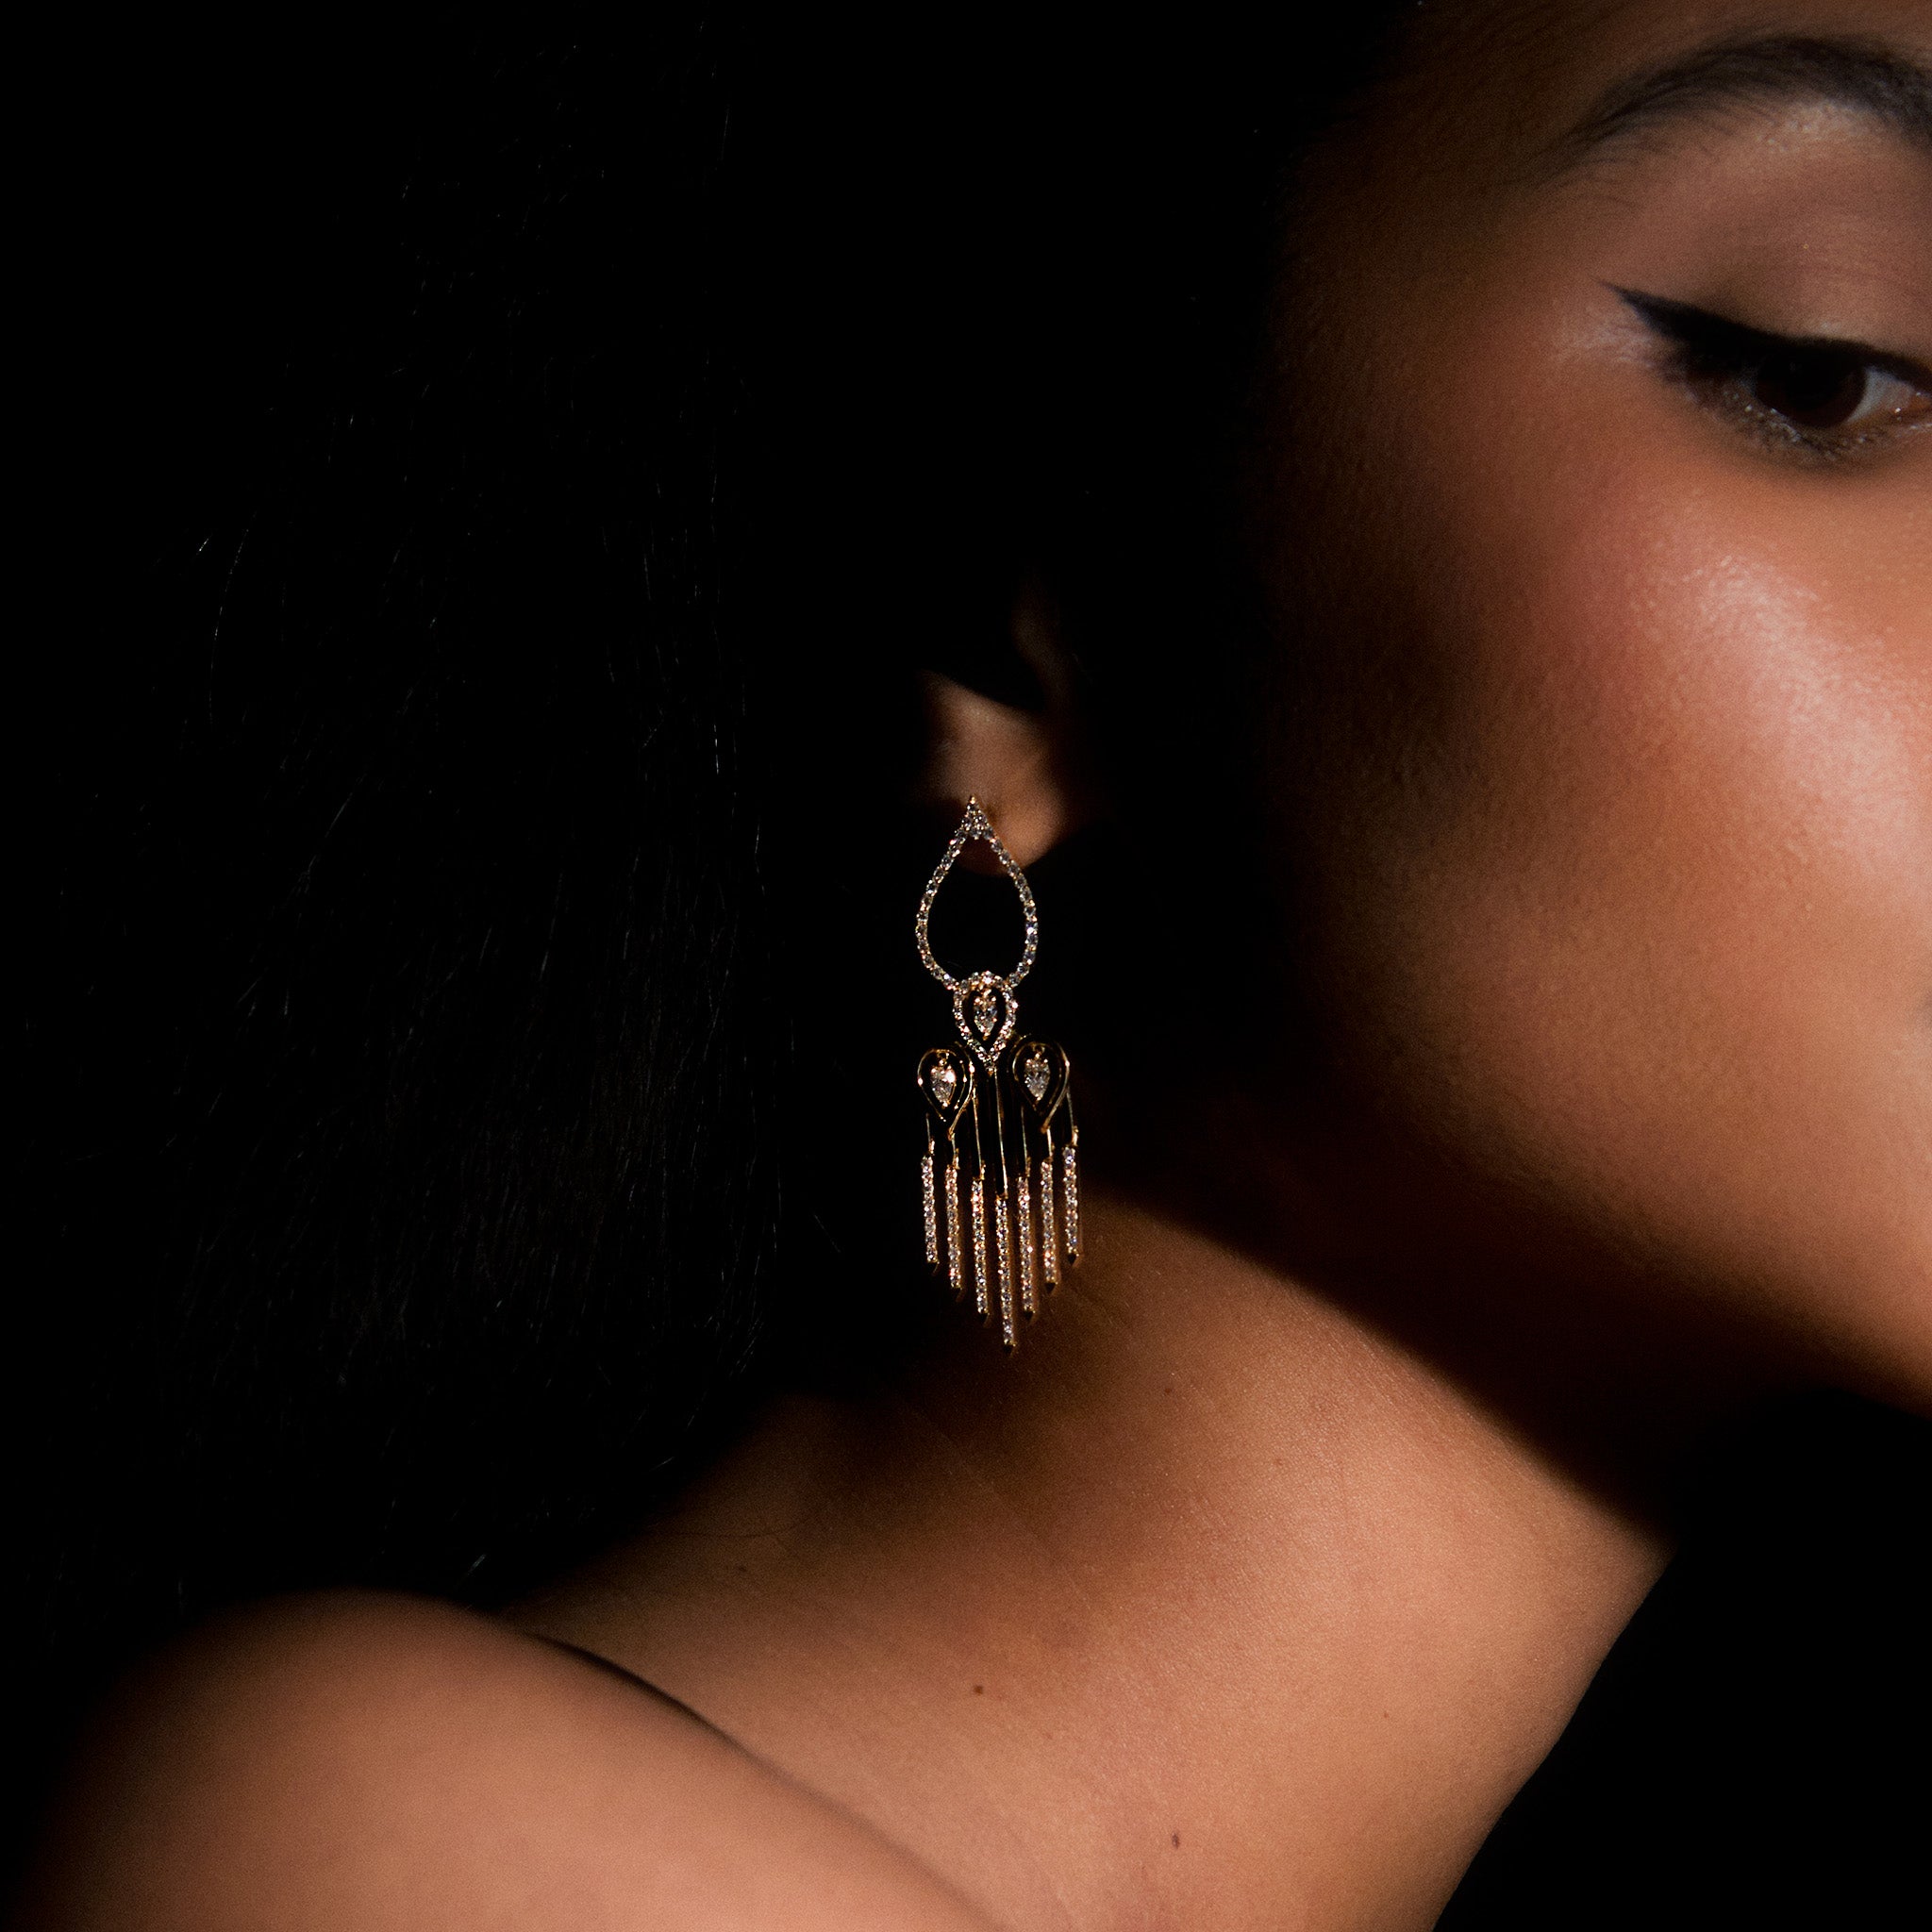 Sahara yellow gold earrings adorned with white diamonds, displayed on model 